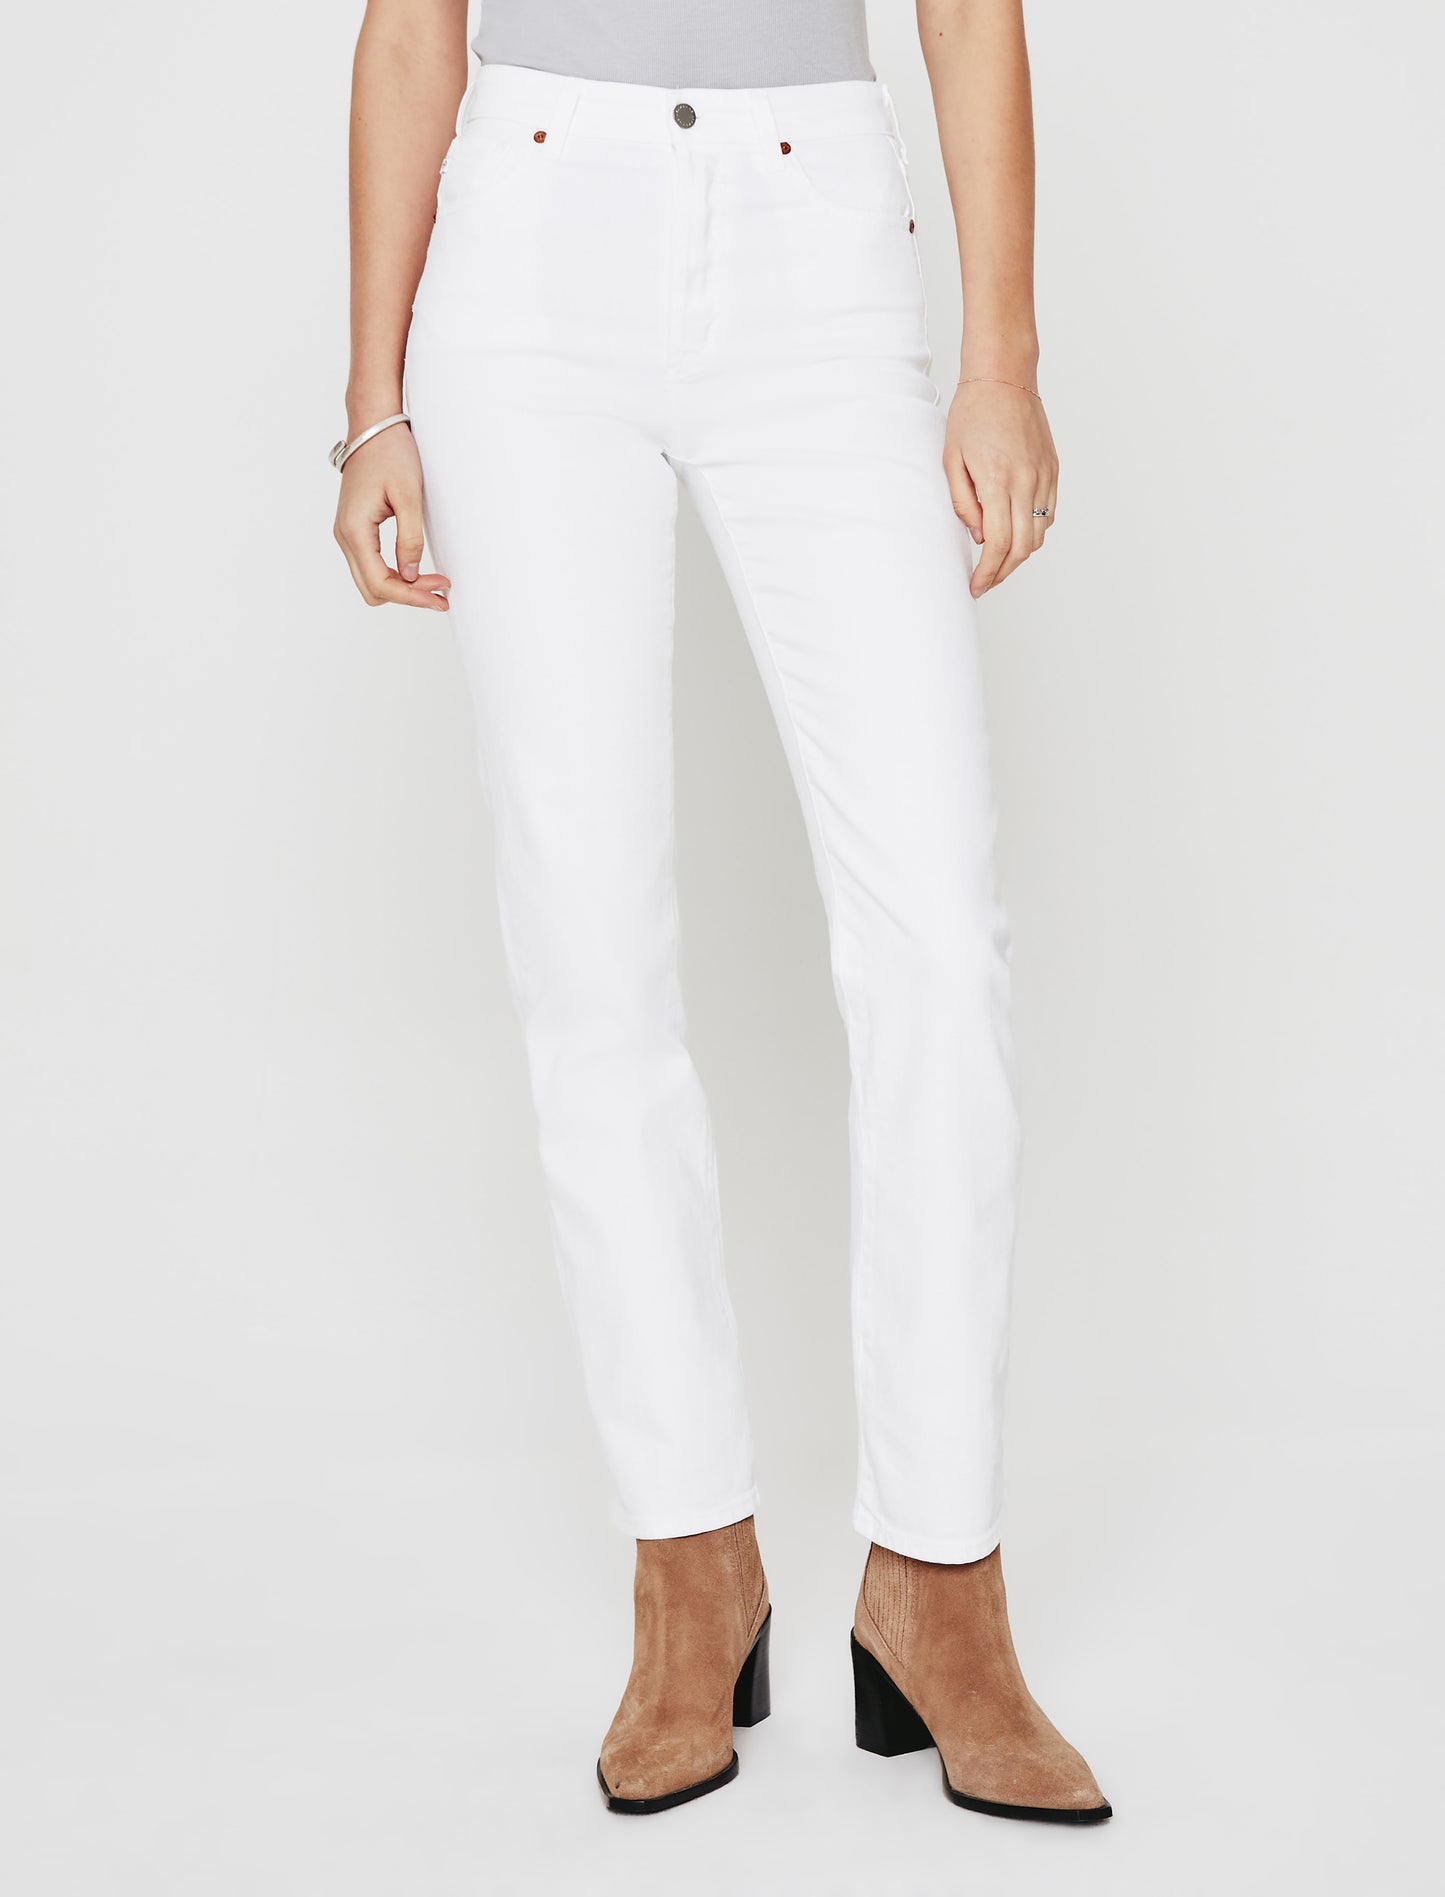 White Straight Pantcigarette White Trousersvintage Formal 